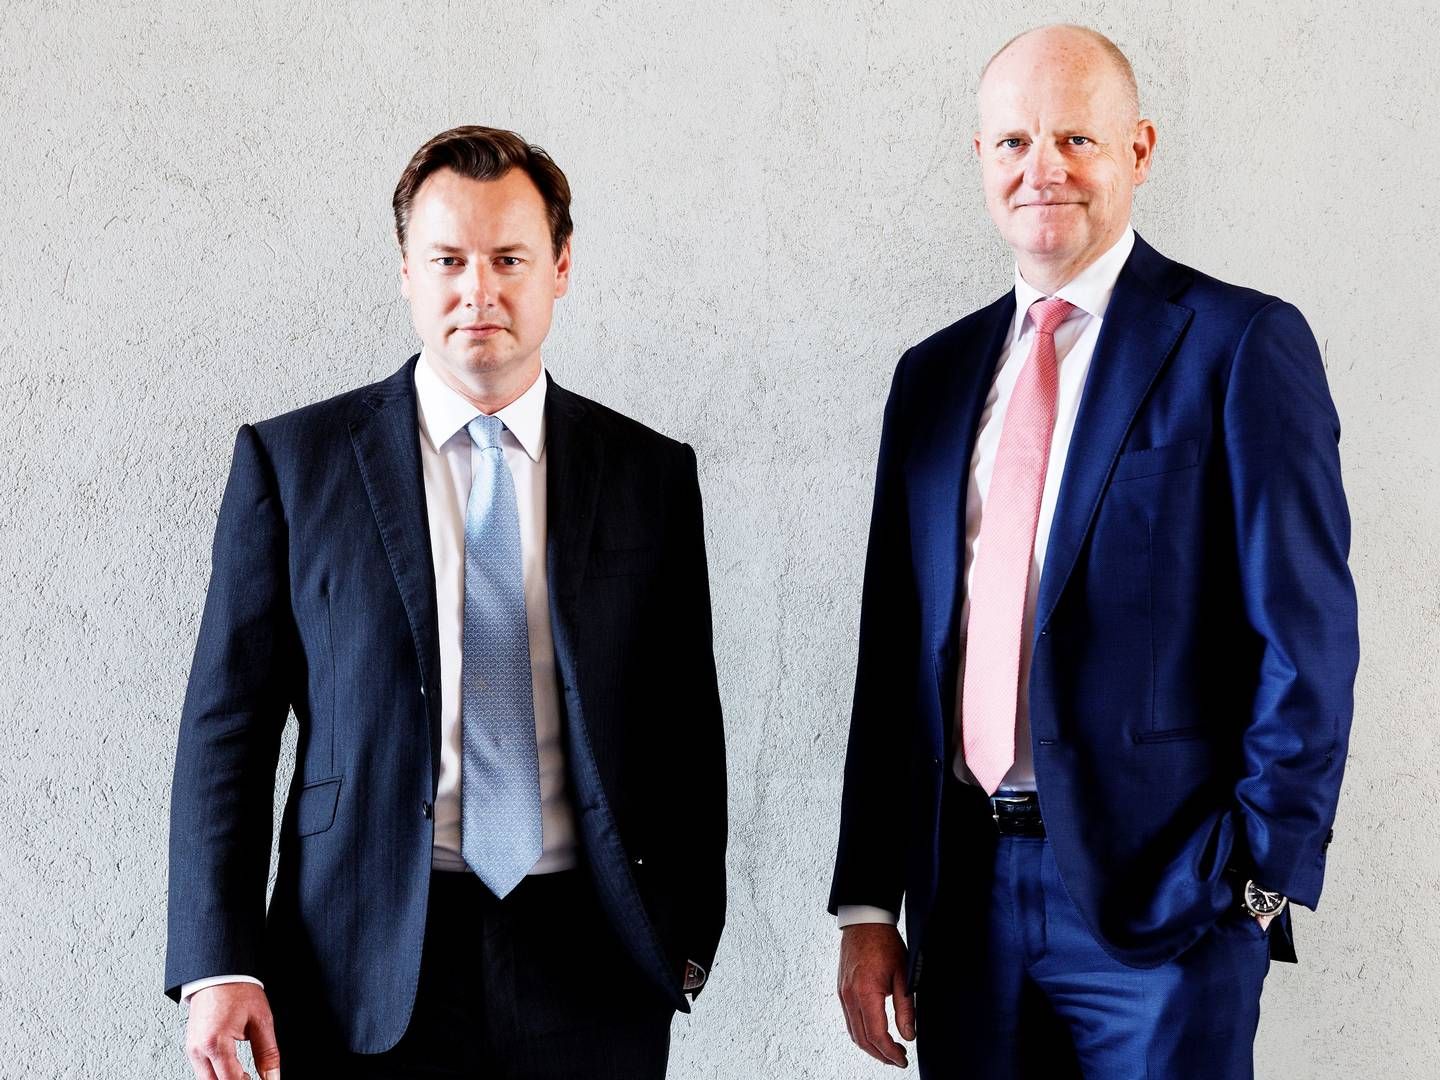 Freddie Lee (left) and Carsten Mortensen, both partners in Dee4 Capital Partners, together with Reefer RoRo AG, will build a green reefer vessel for banana export to Europe. | Foto: Pr-foto